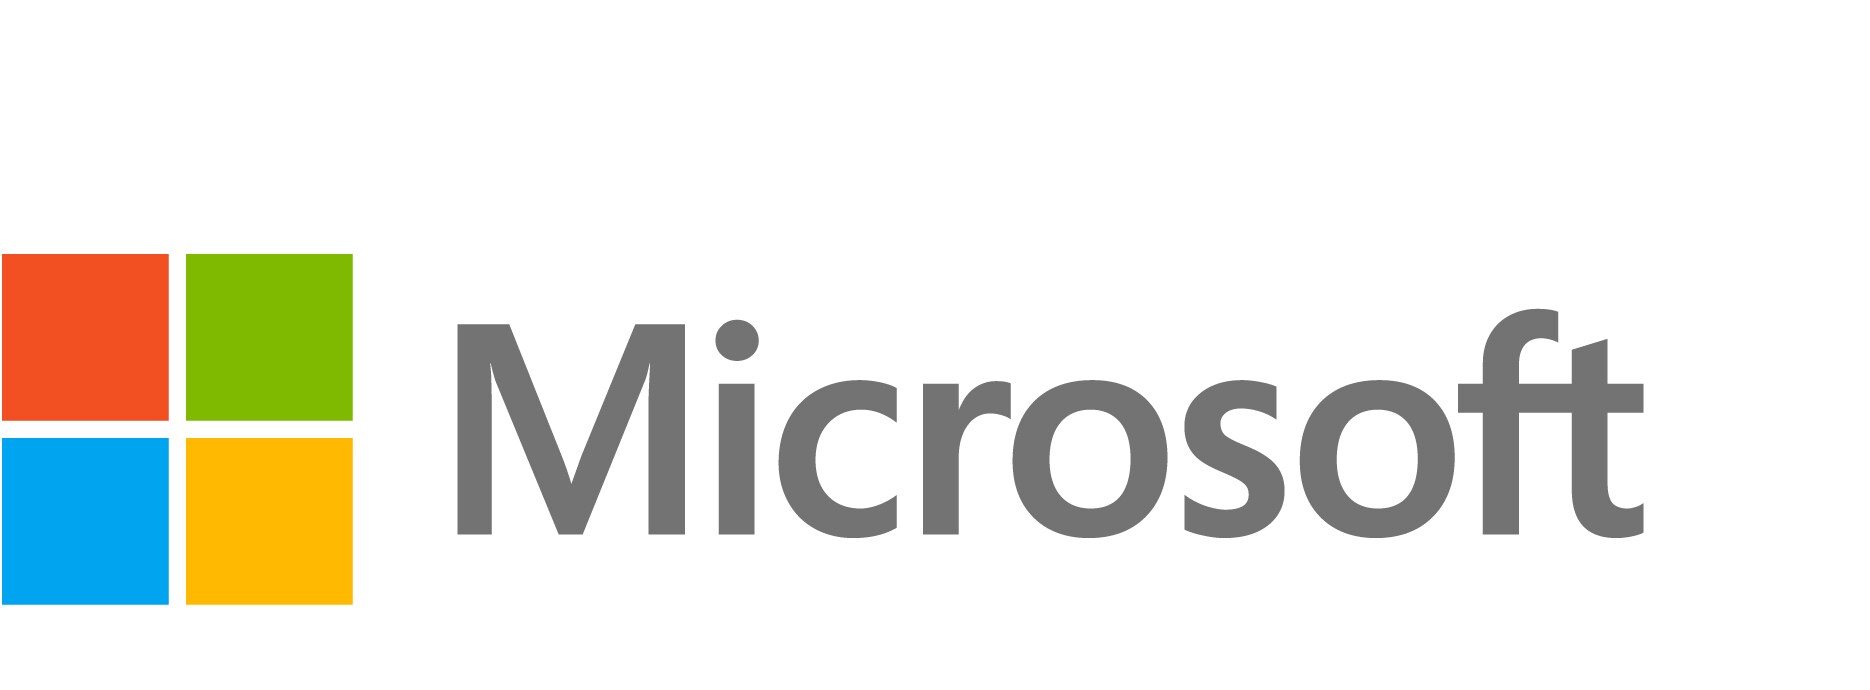 Microsoft Extended Hardware Service Plan Plus - extended service agreement - 2 years - shipment